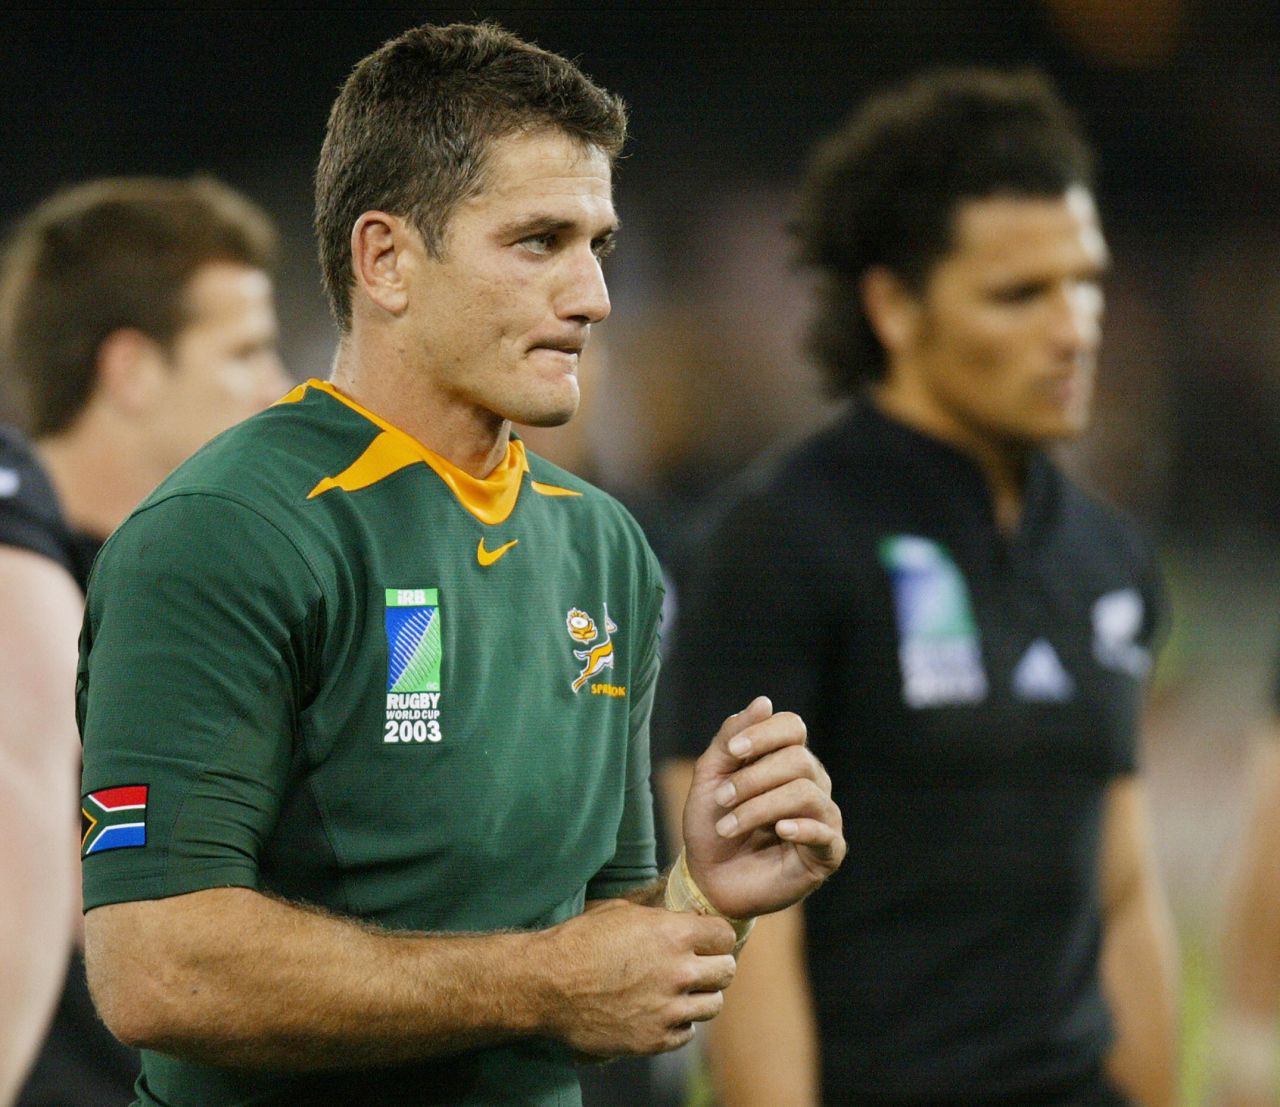 He played his final Test match for South Africa against New Zealand, in a quarterfinal defeat at the 2003 World Cup. At the time of his retirement, van der Westhuizen was the most-capped player in Springboks history.